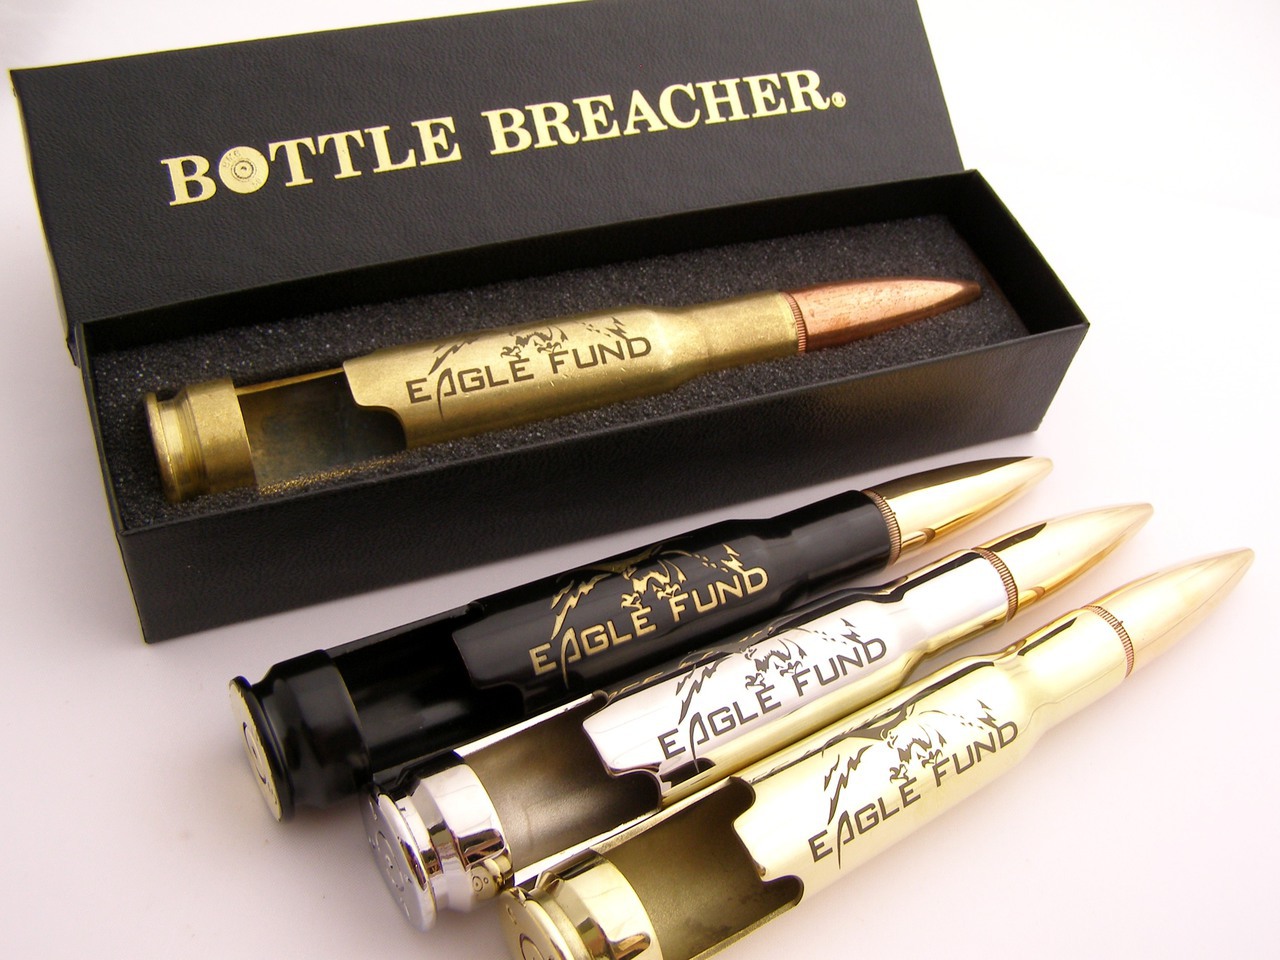 Over 50 non-profits helped by company making .50-caliber ‘Bottle Breacher’